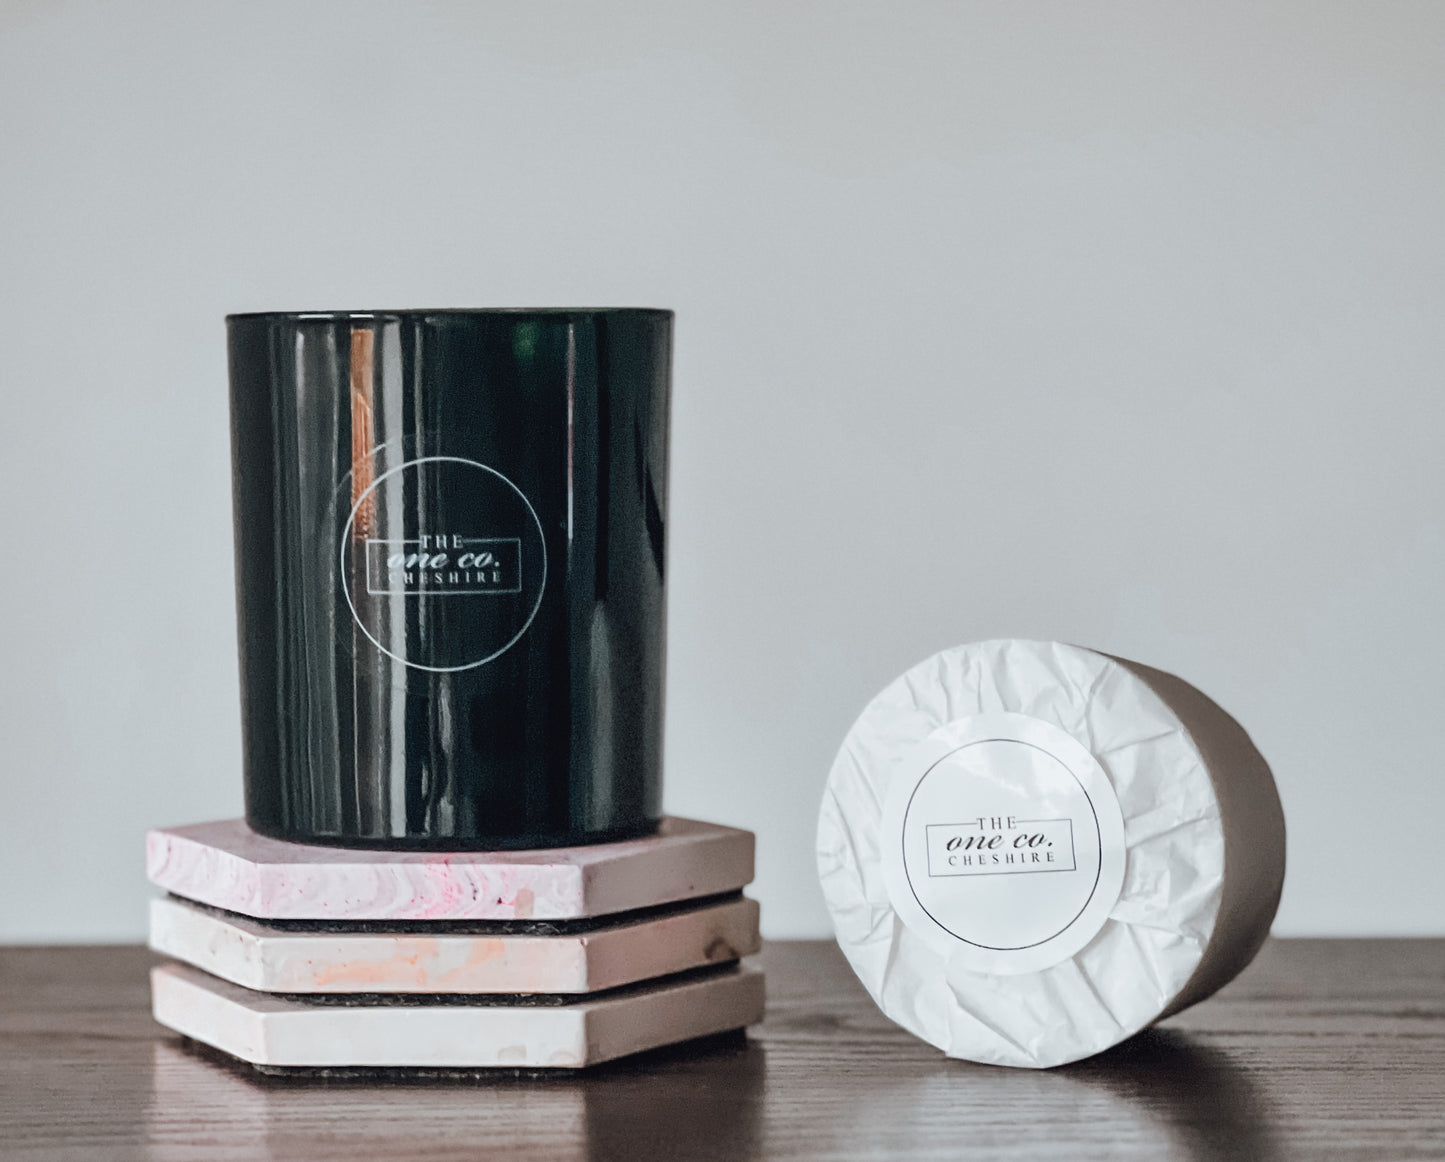 The Candle Refill Subscription